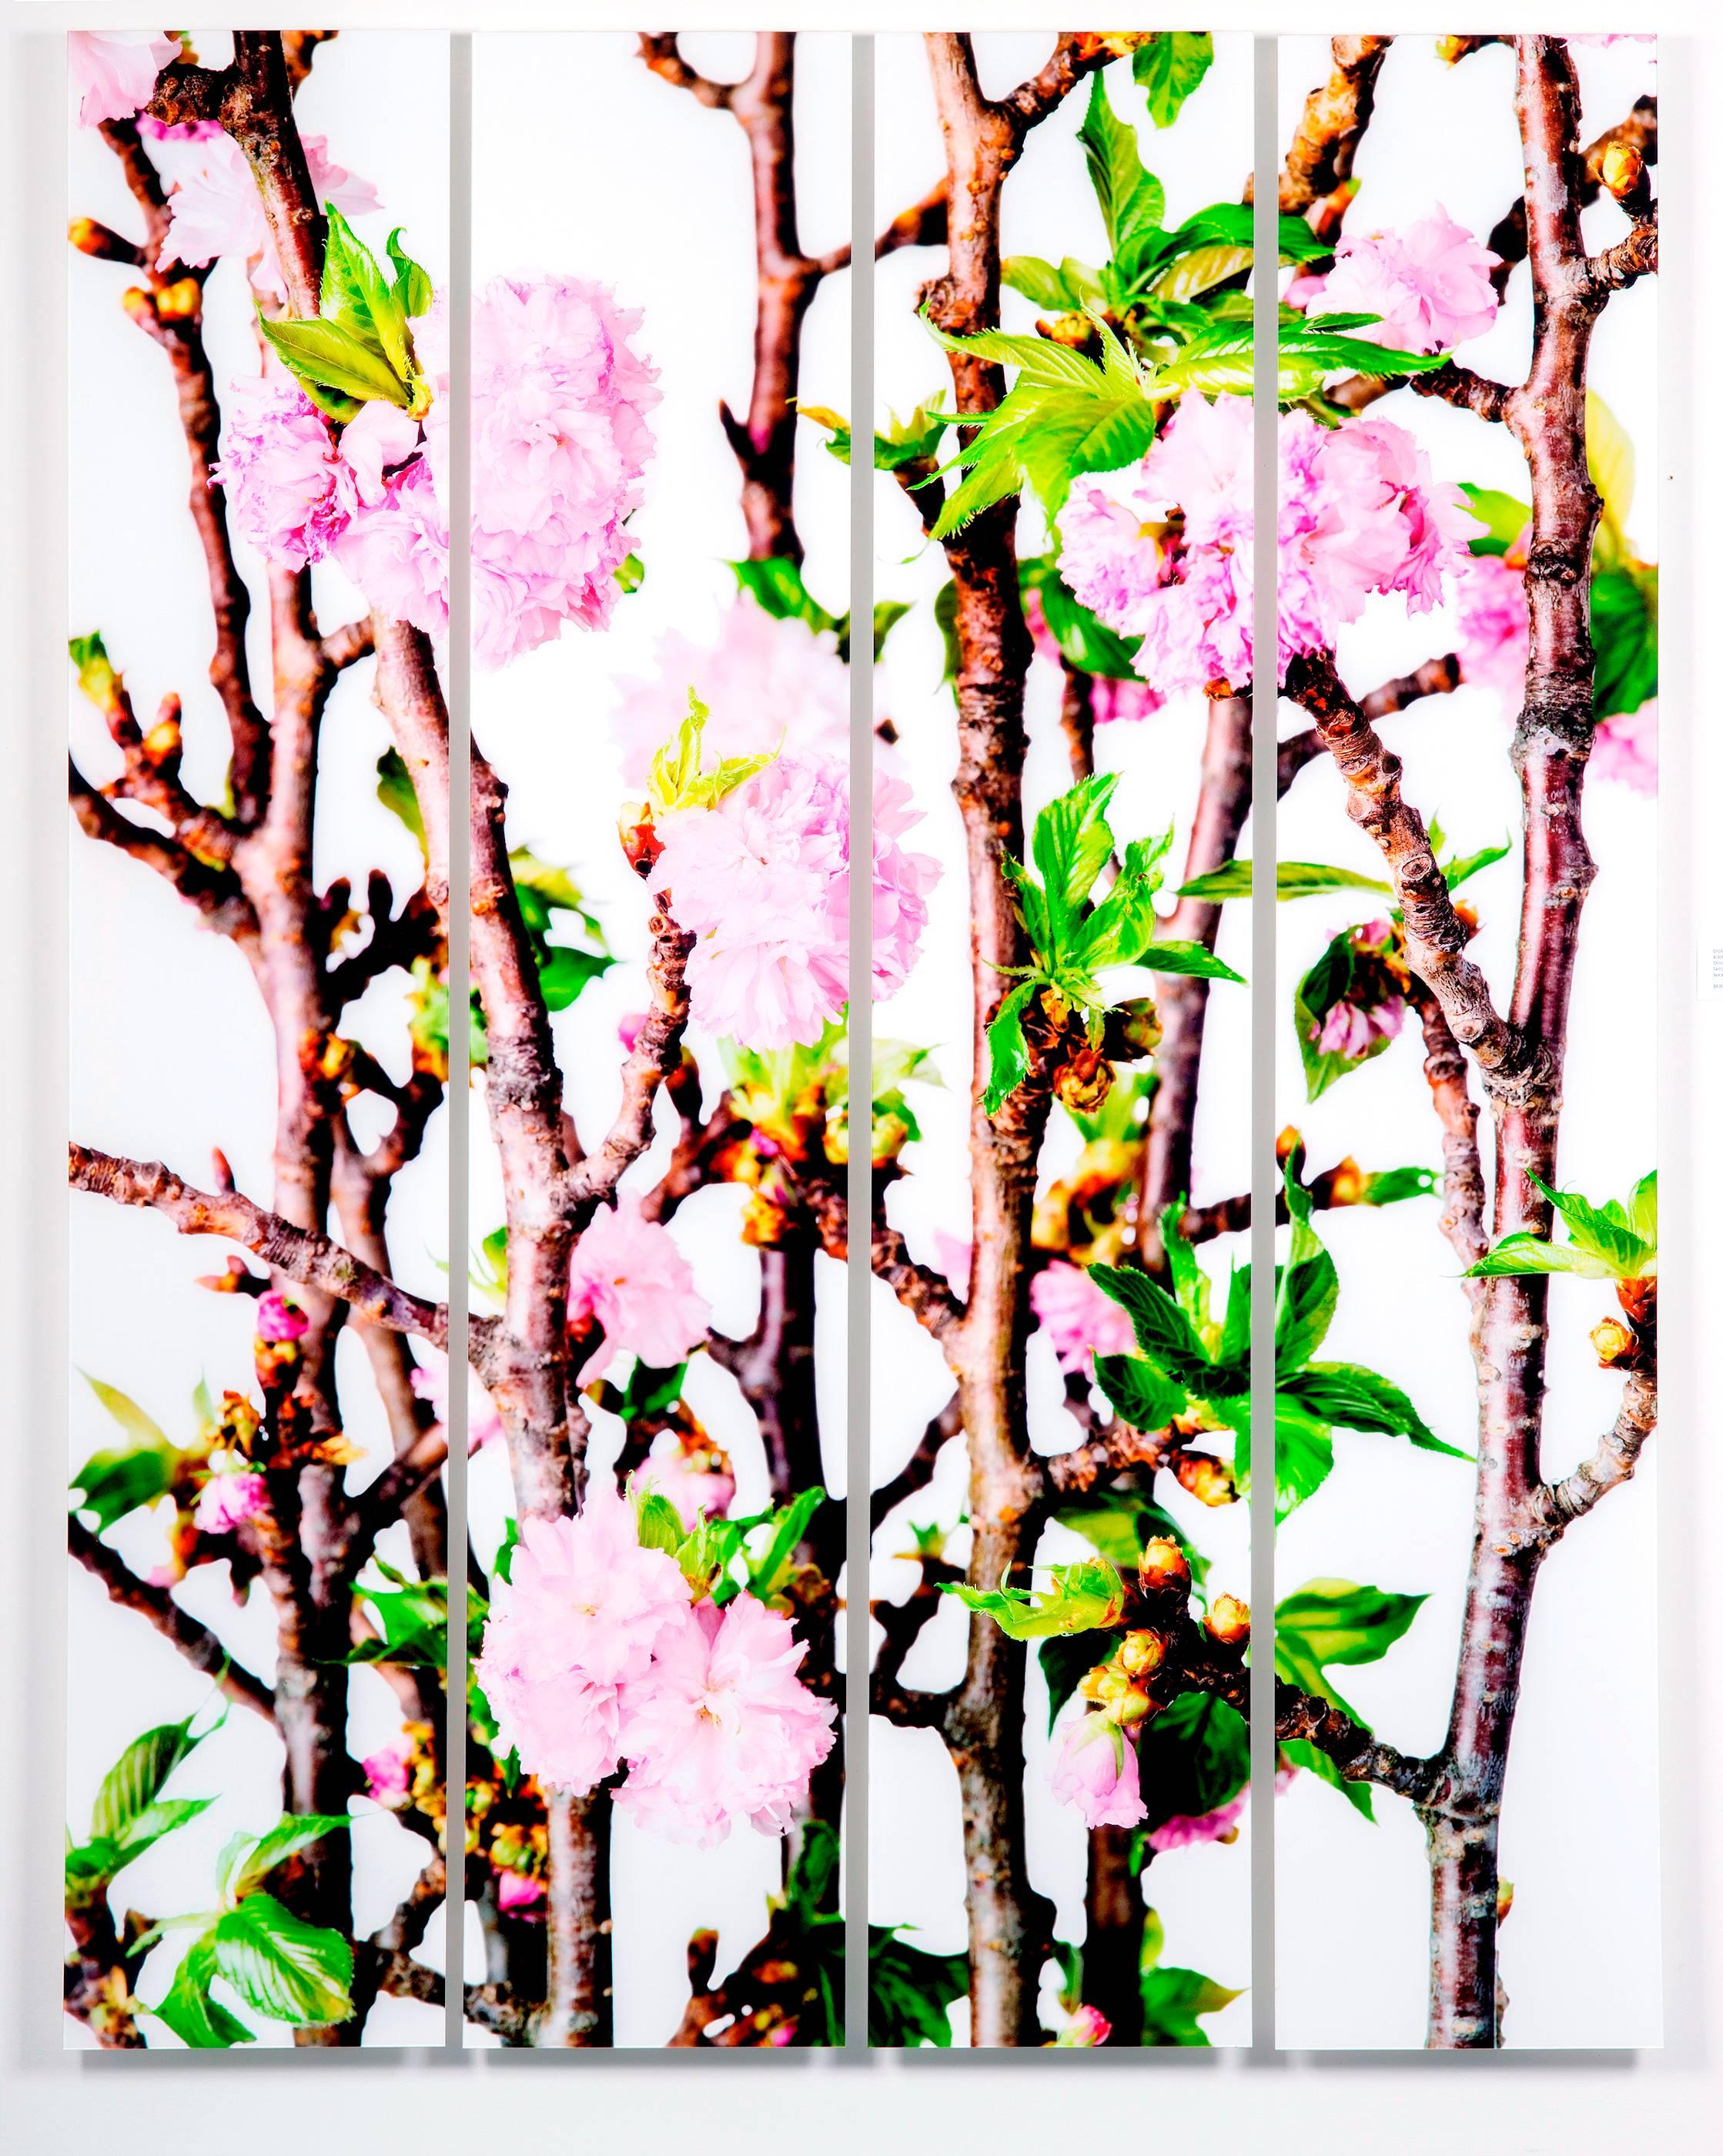 Cherry Blossom, from Design by Nature series  - Photograph by Albert Delamour